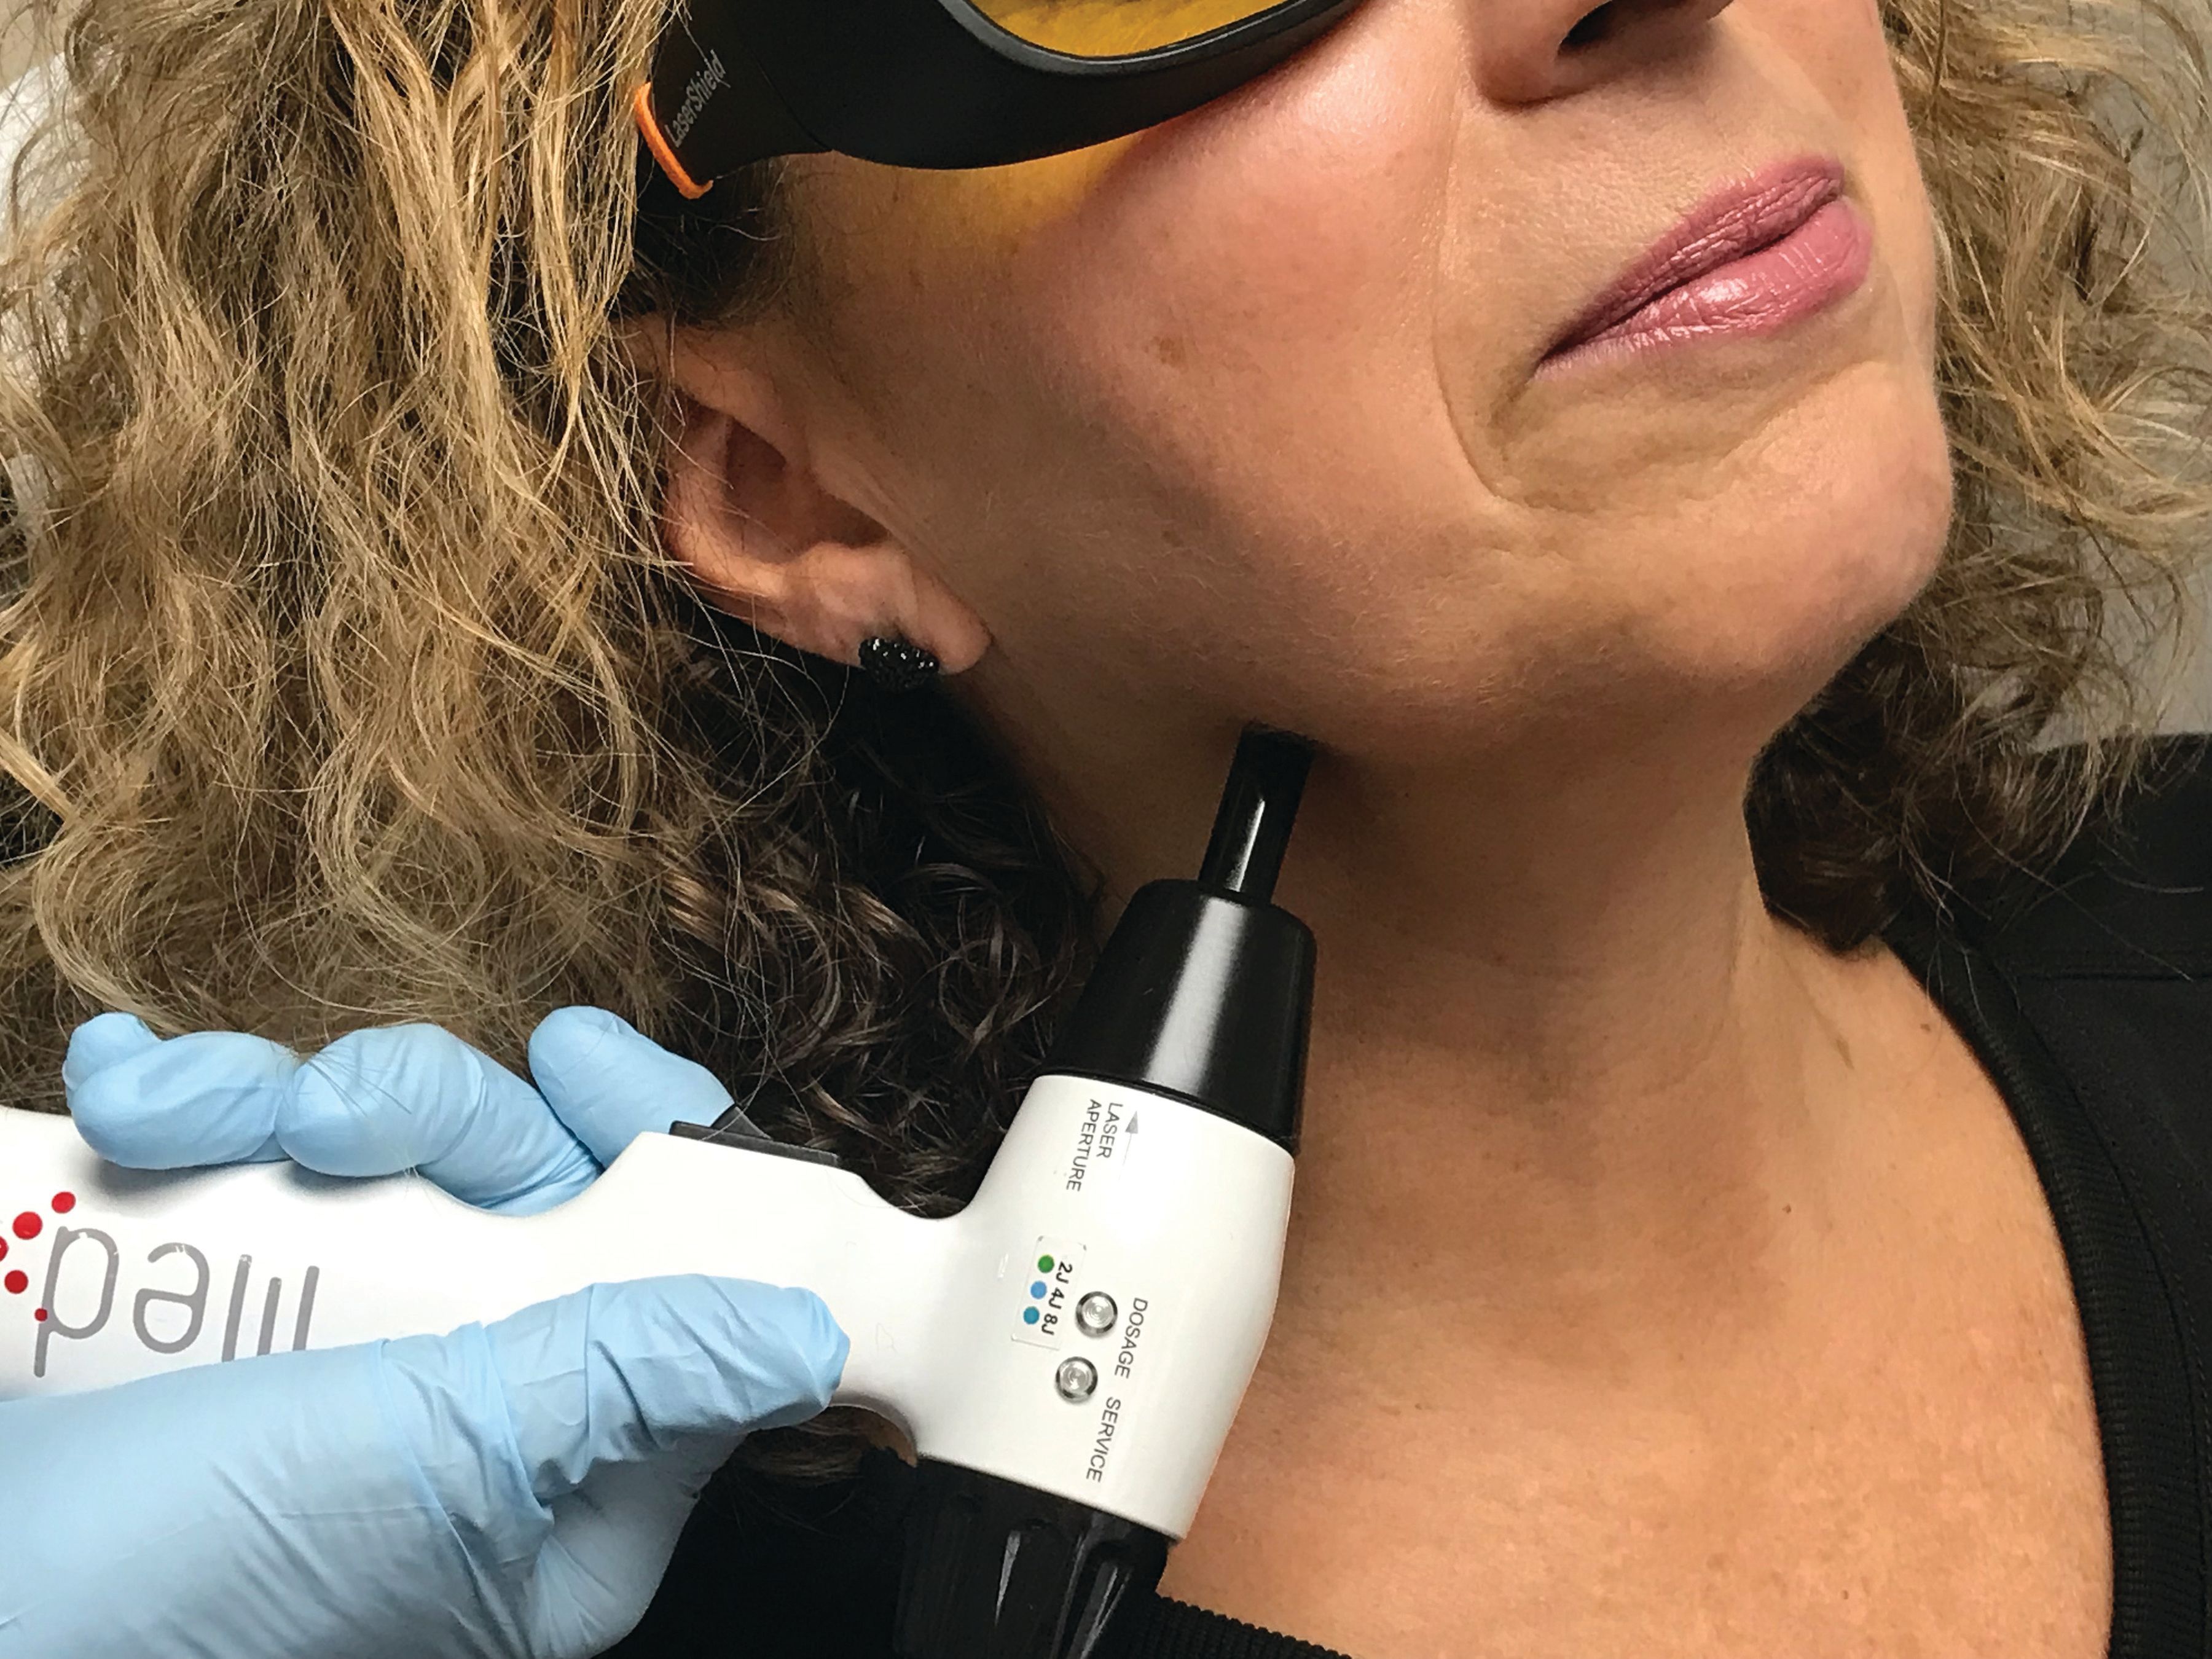  How to Treat Facial Pain With Photobiomodulation/Low-Level Laser Therapy